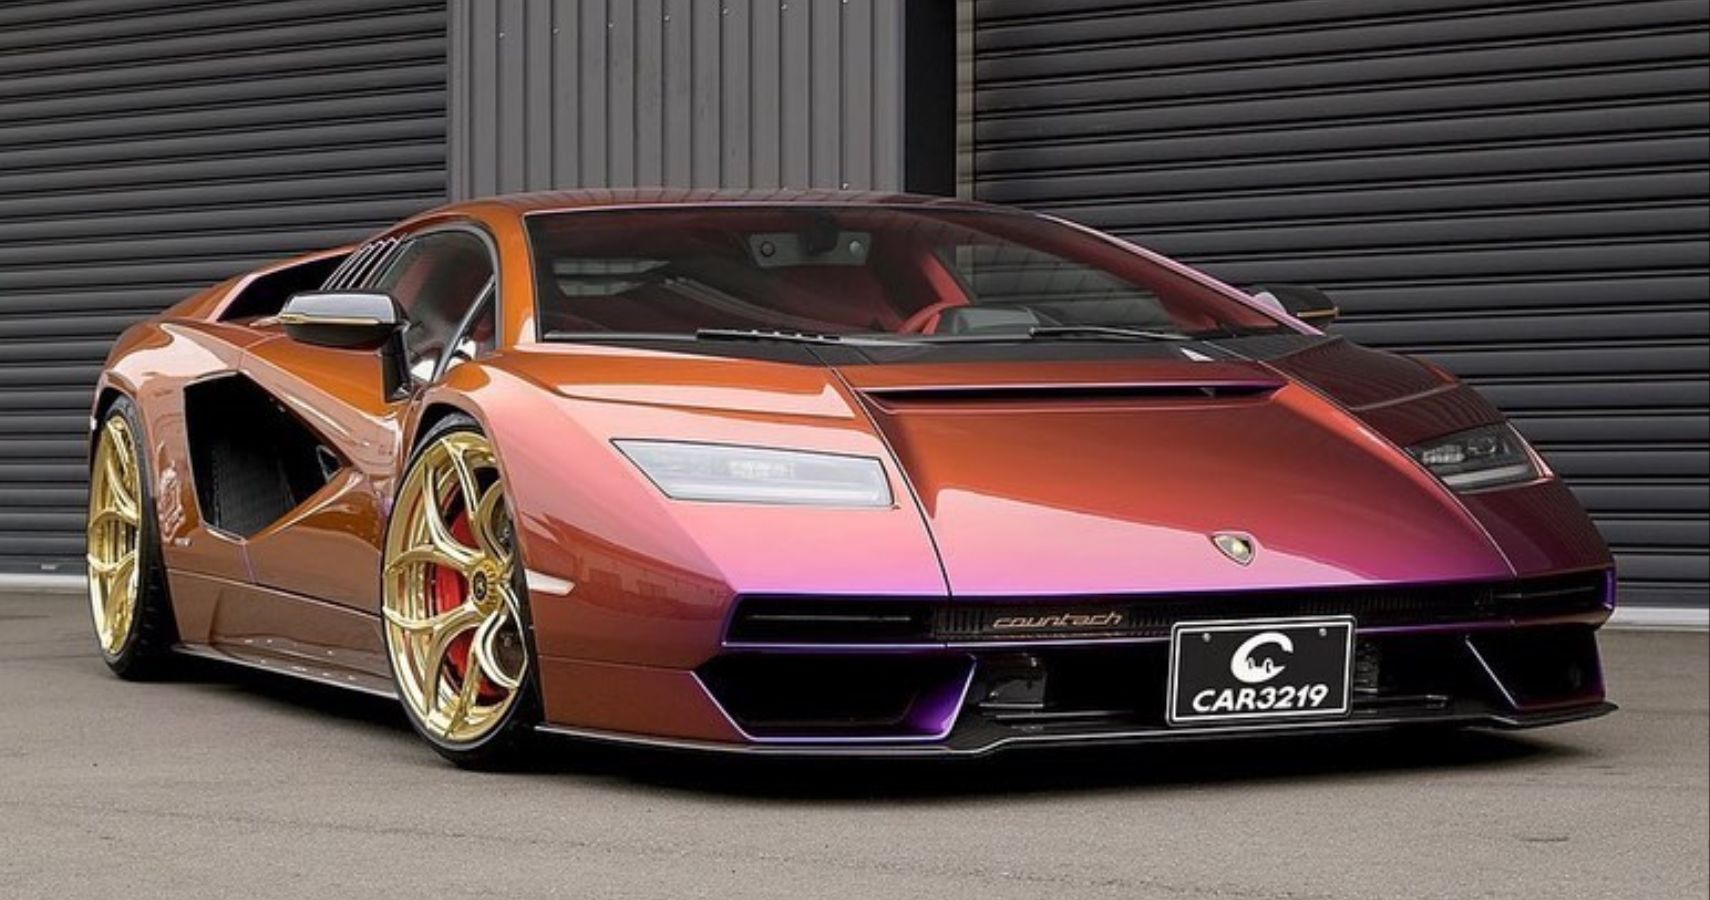 The World’s First Modified 2021 Countach Has A Paint Job Unlike Any Other Lamborghini